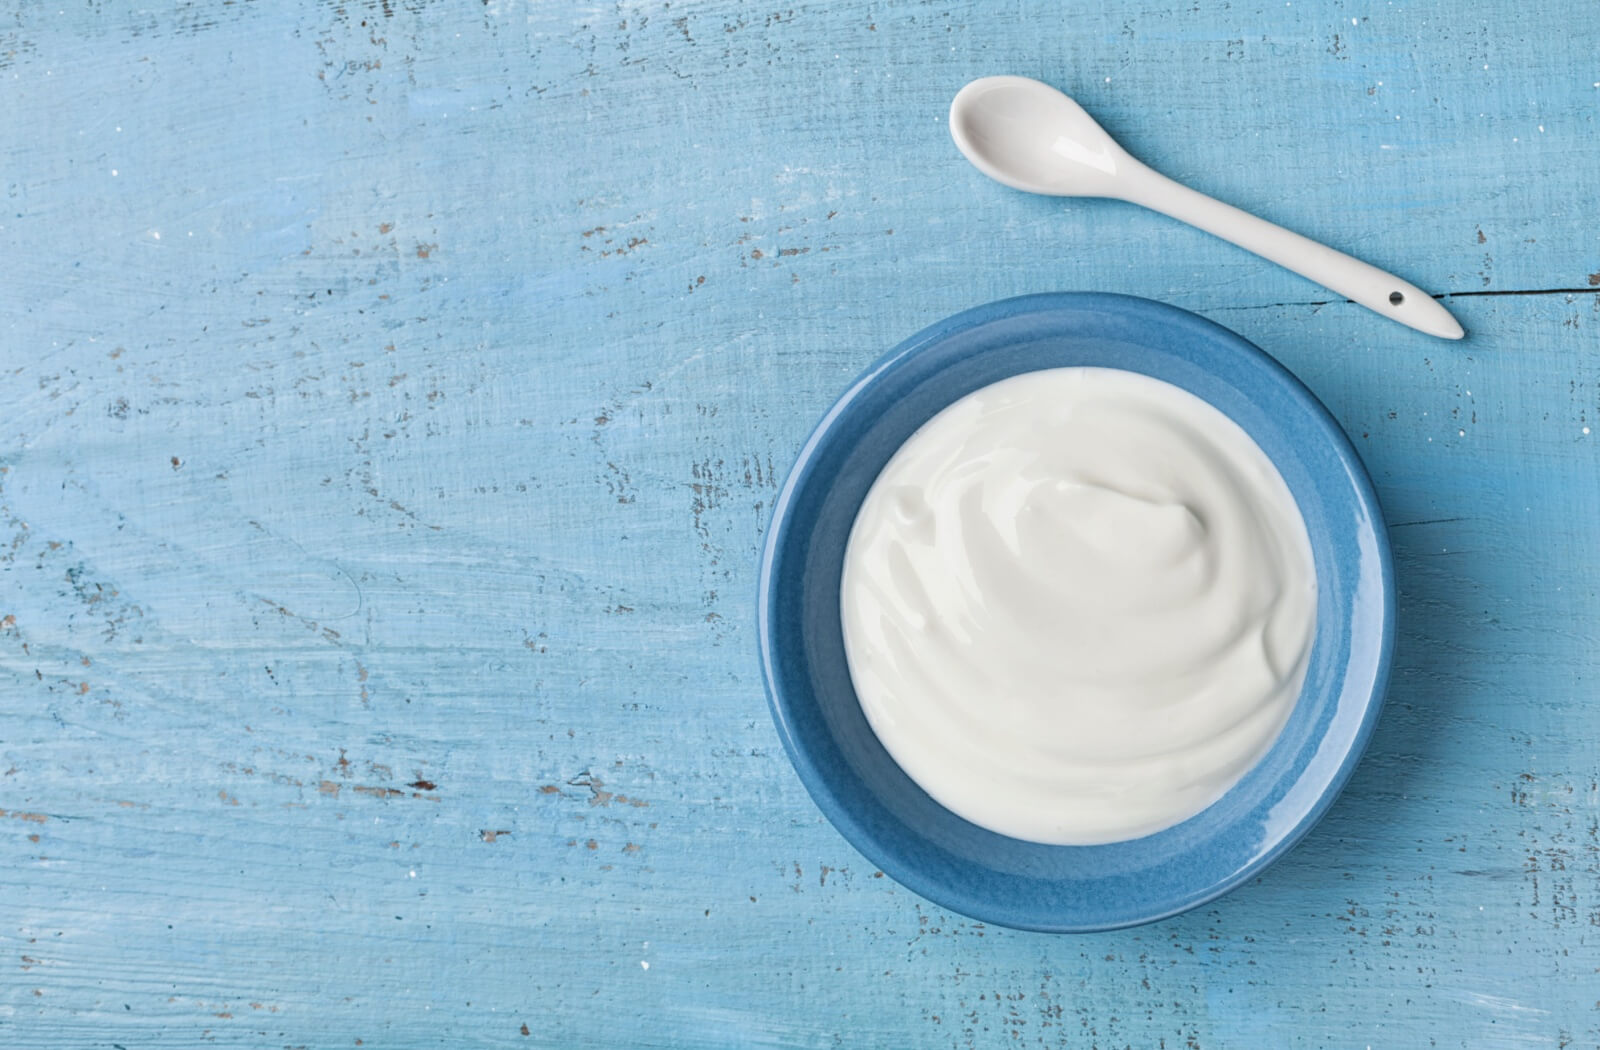 A bowl of yogurt on a blue wooden table.